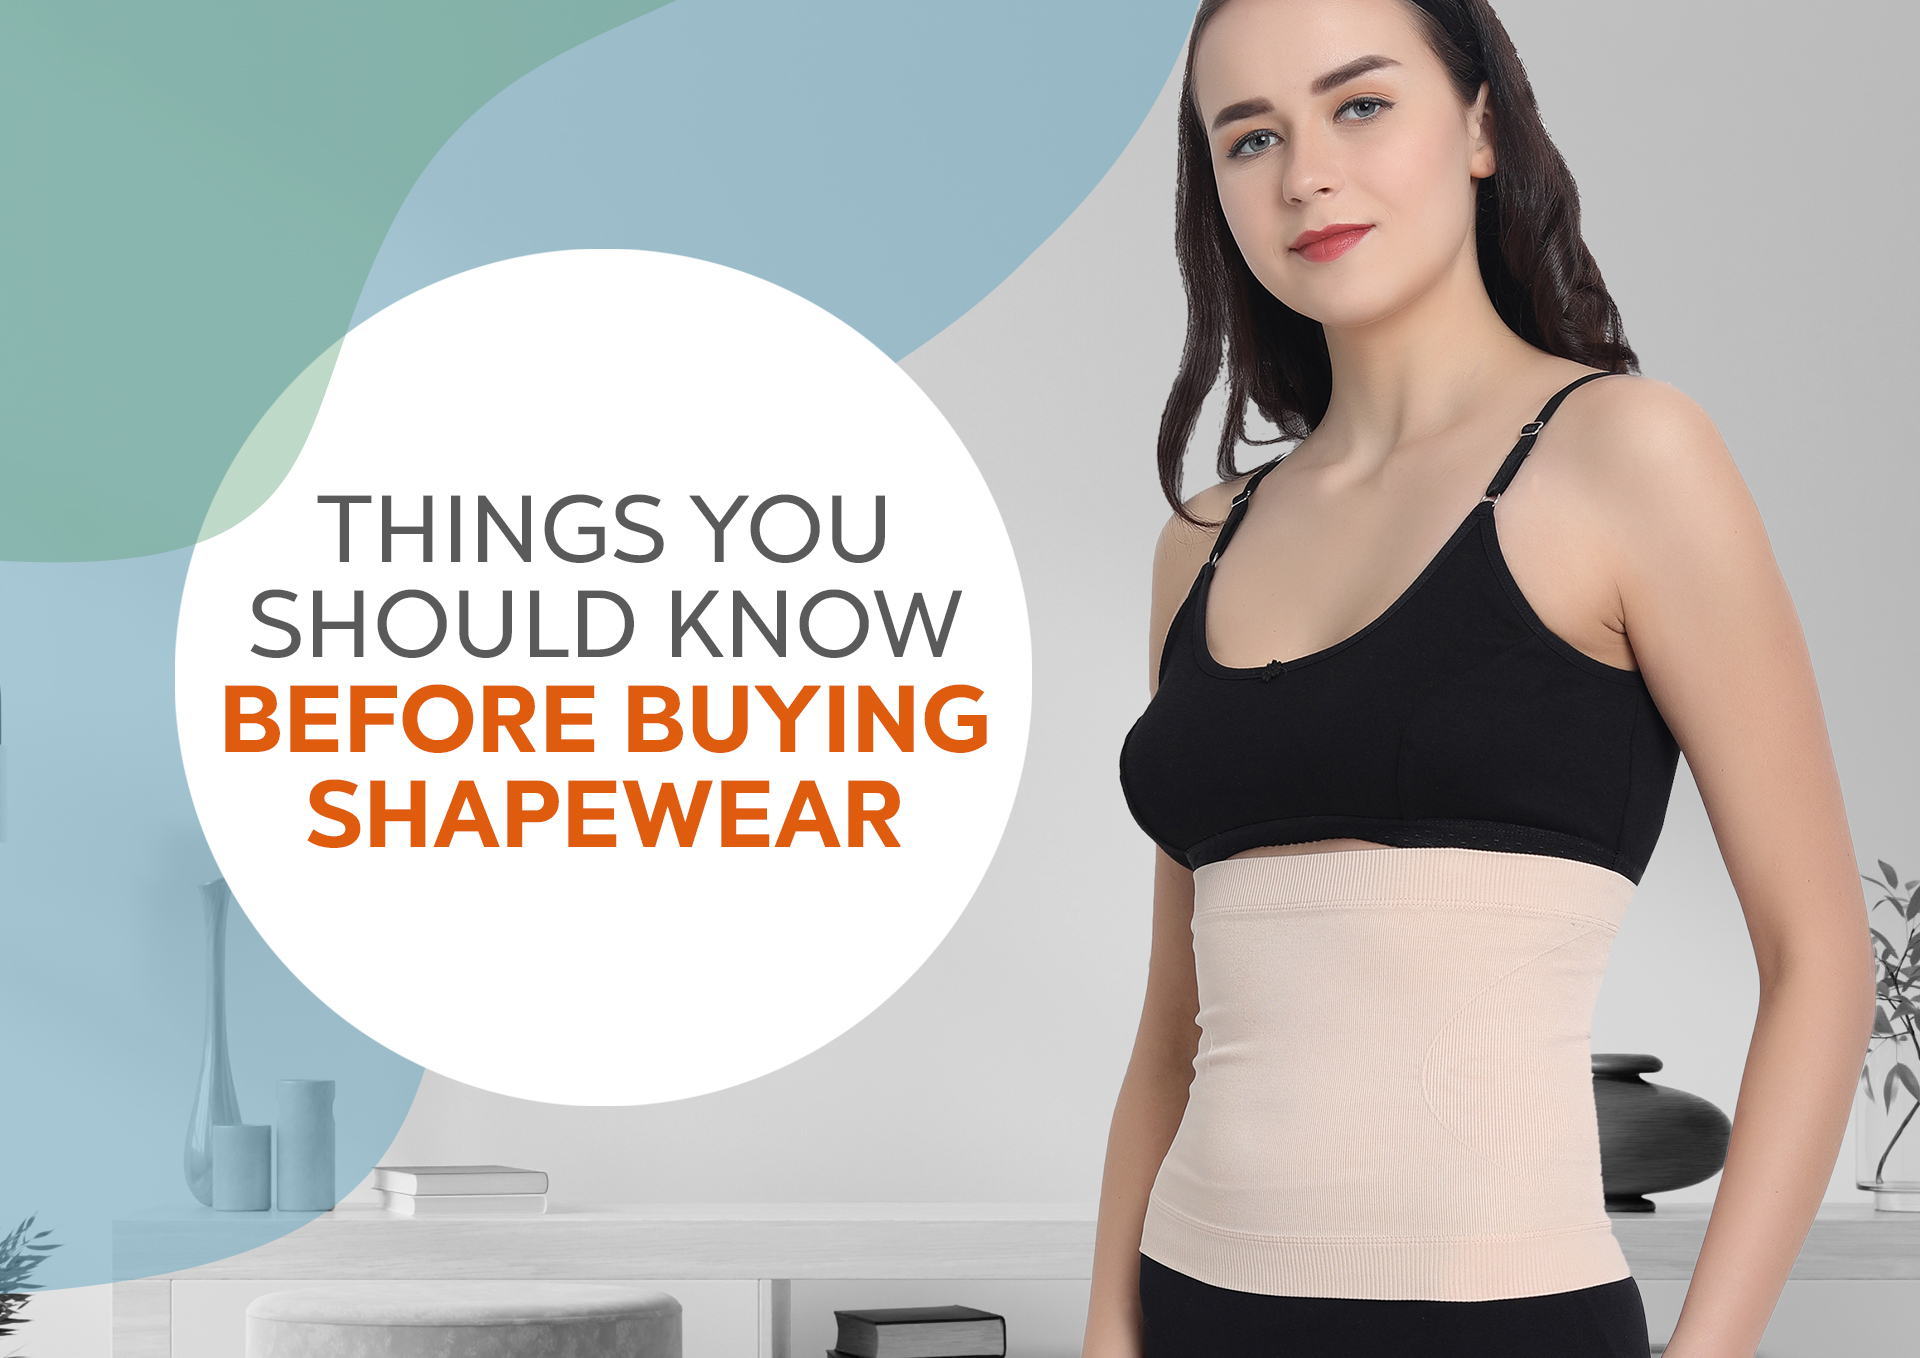 Things You Should Know Before Buying Shapewear